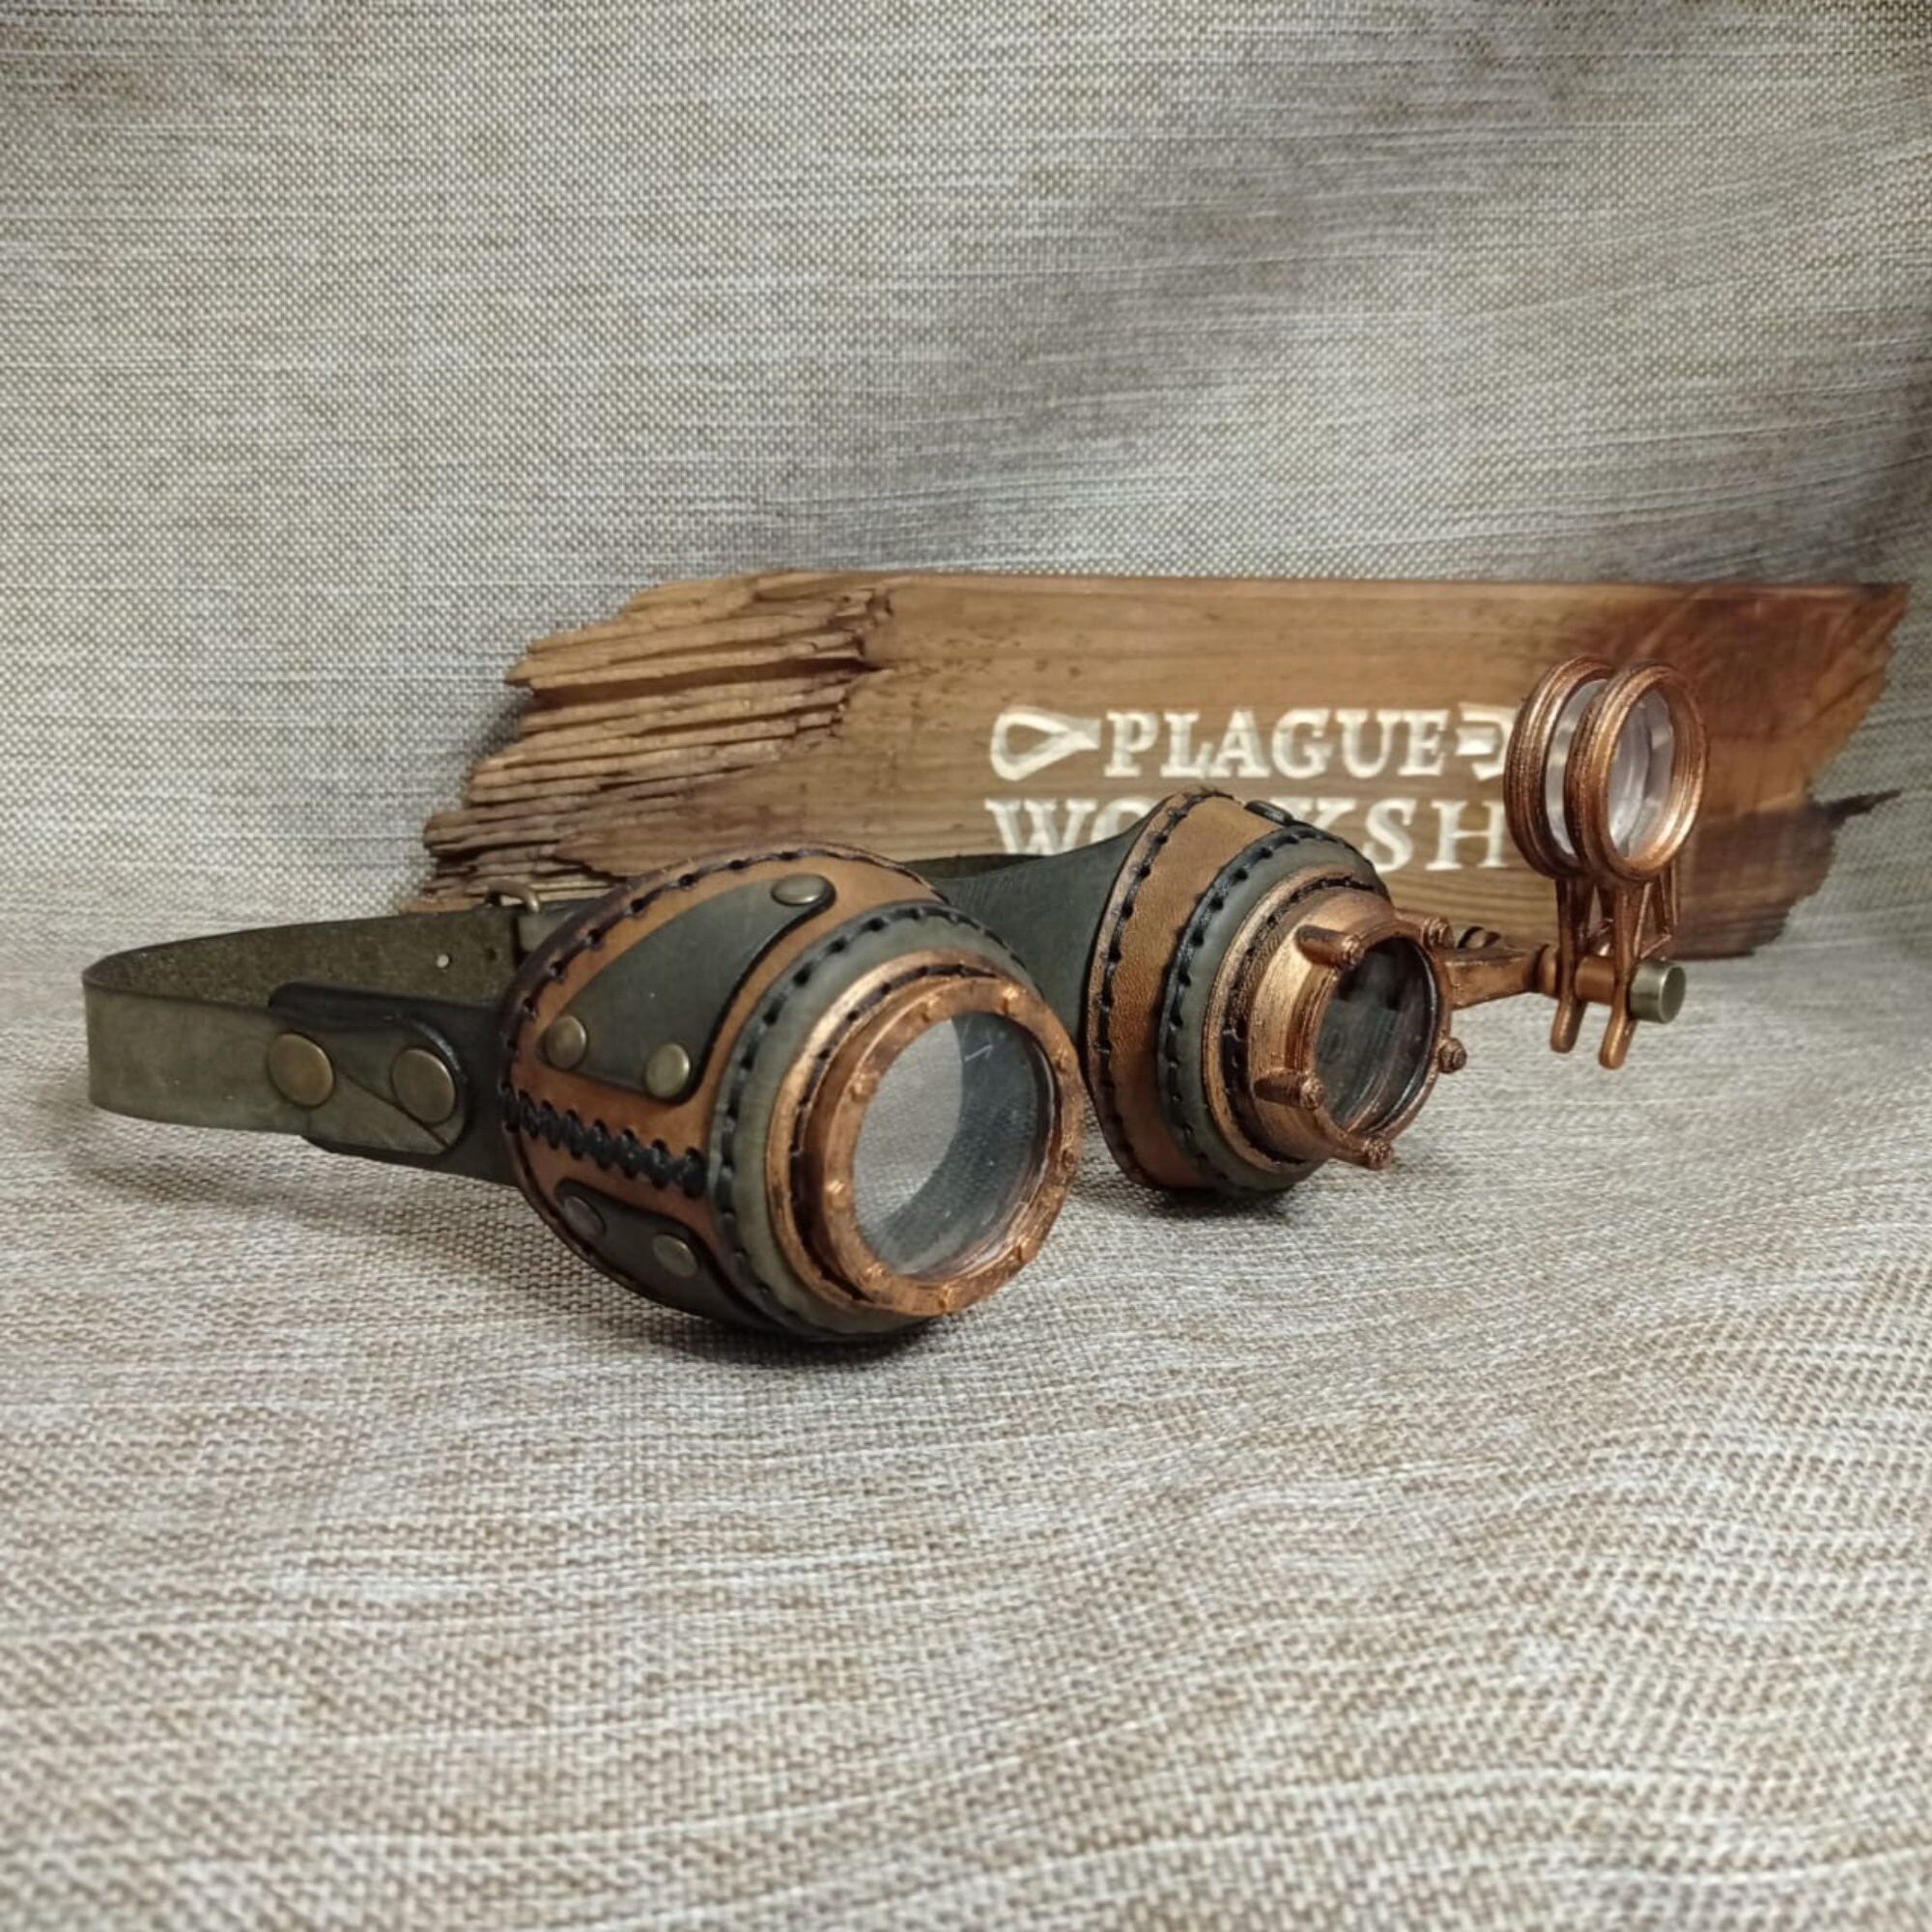 Steampunk Goggles, Leather Gloves and bowtie – SteampunkLot